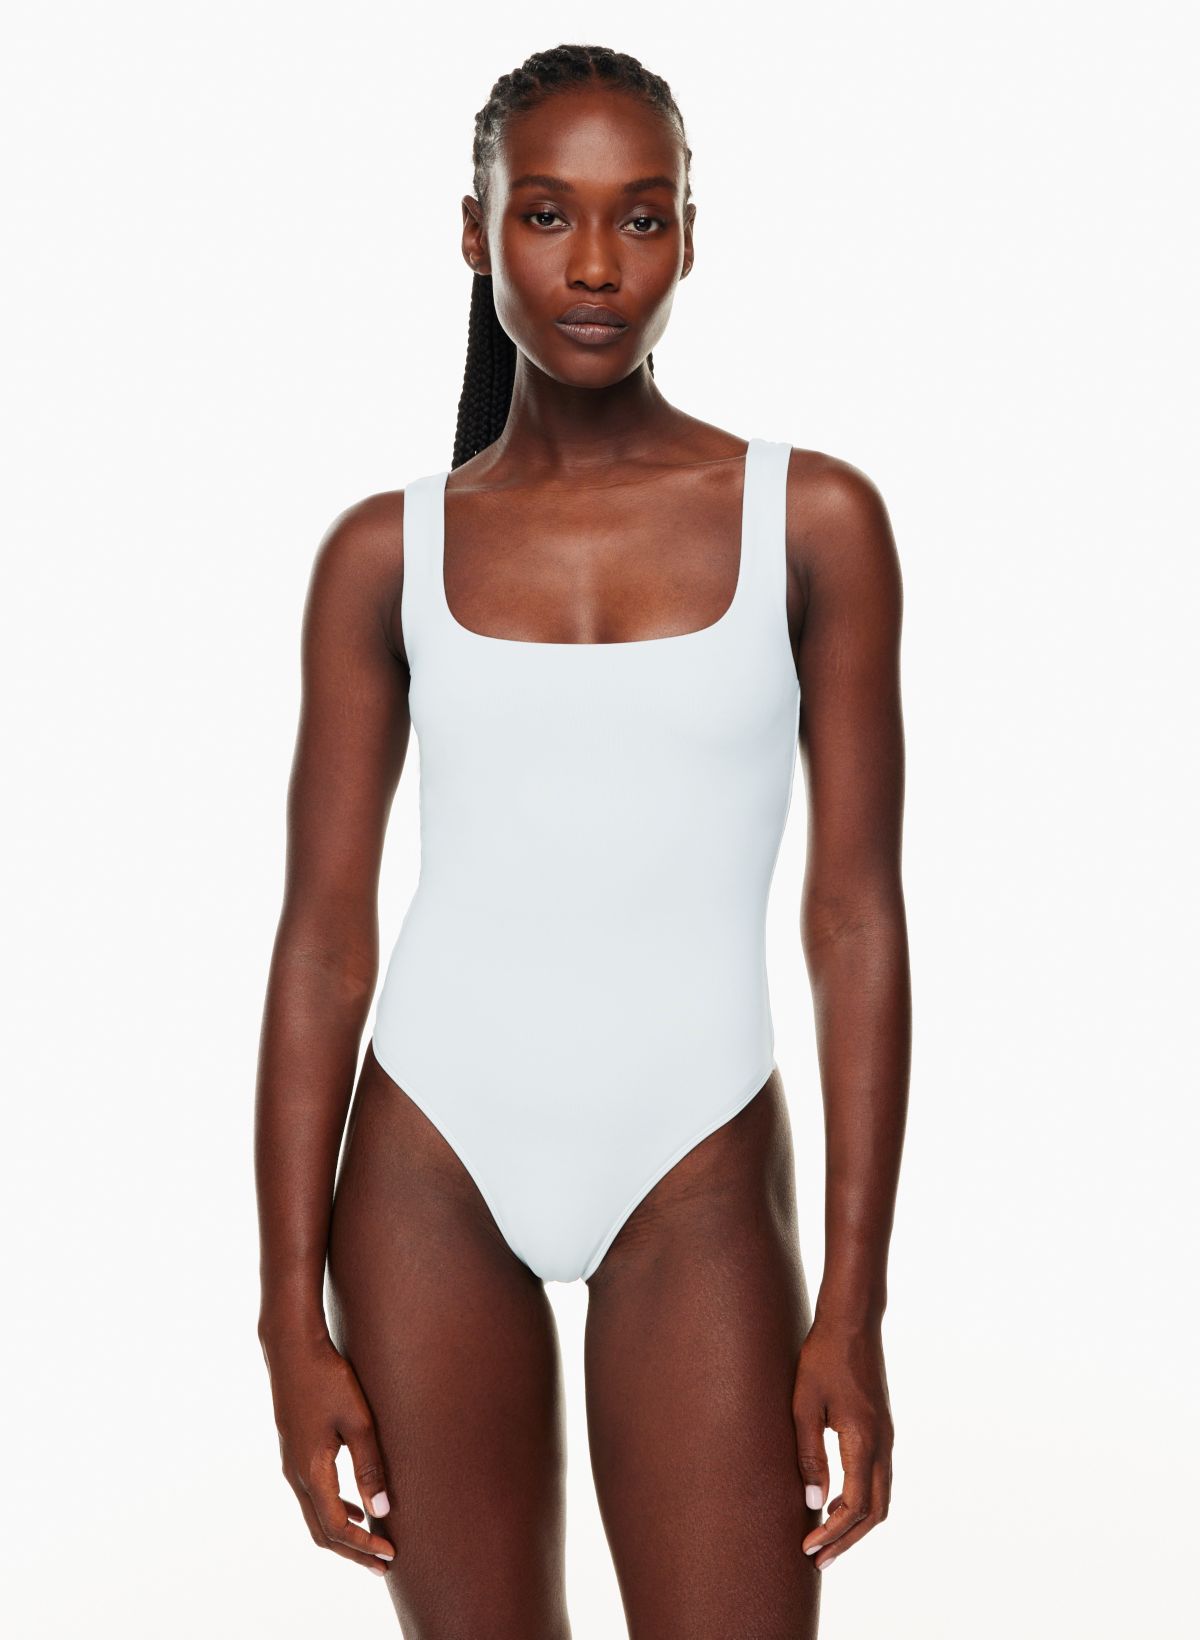 Will you invest in this bodysuit? I found the perfect bodysuit